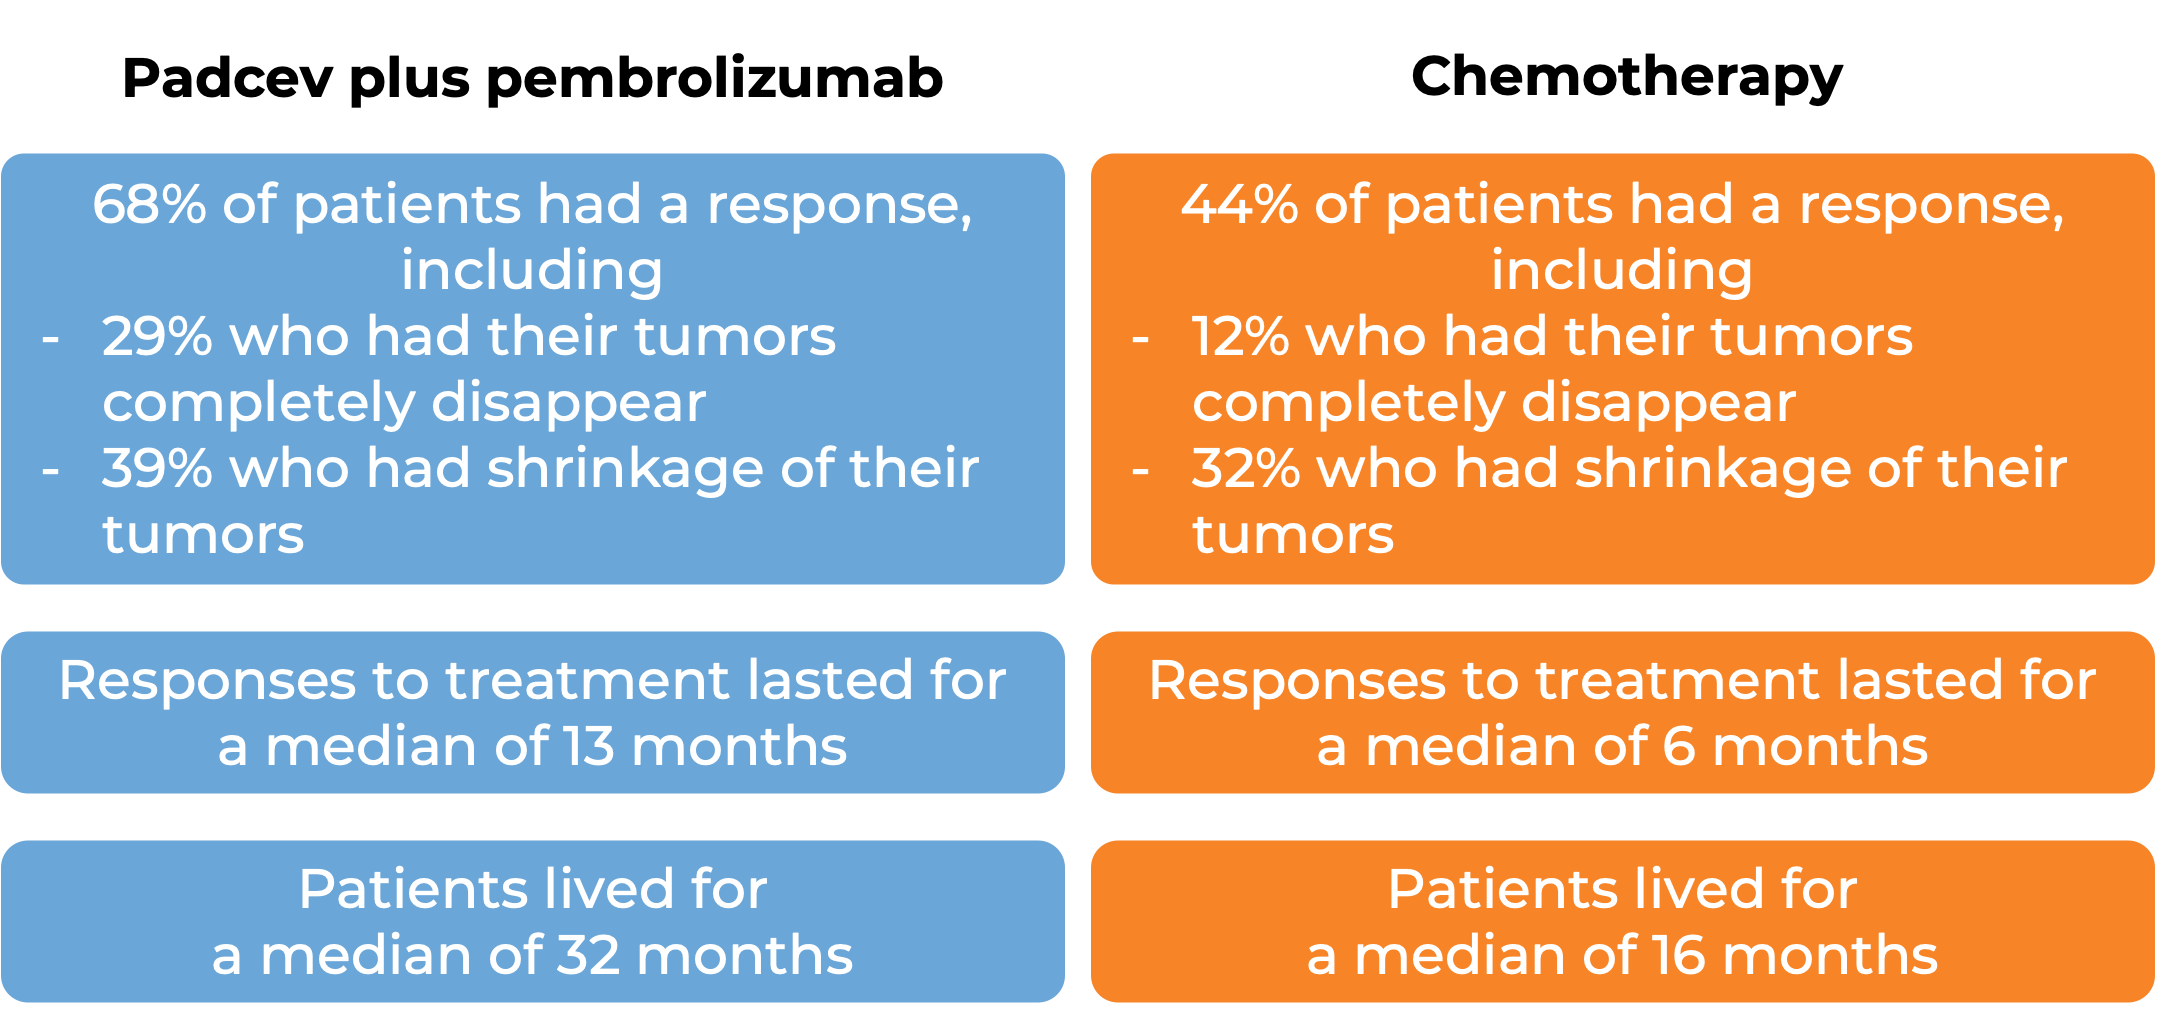 Results after treatment with Padcev and pembrolizumab vs chemo (diagram)